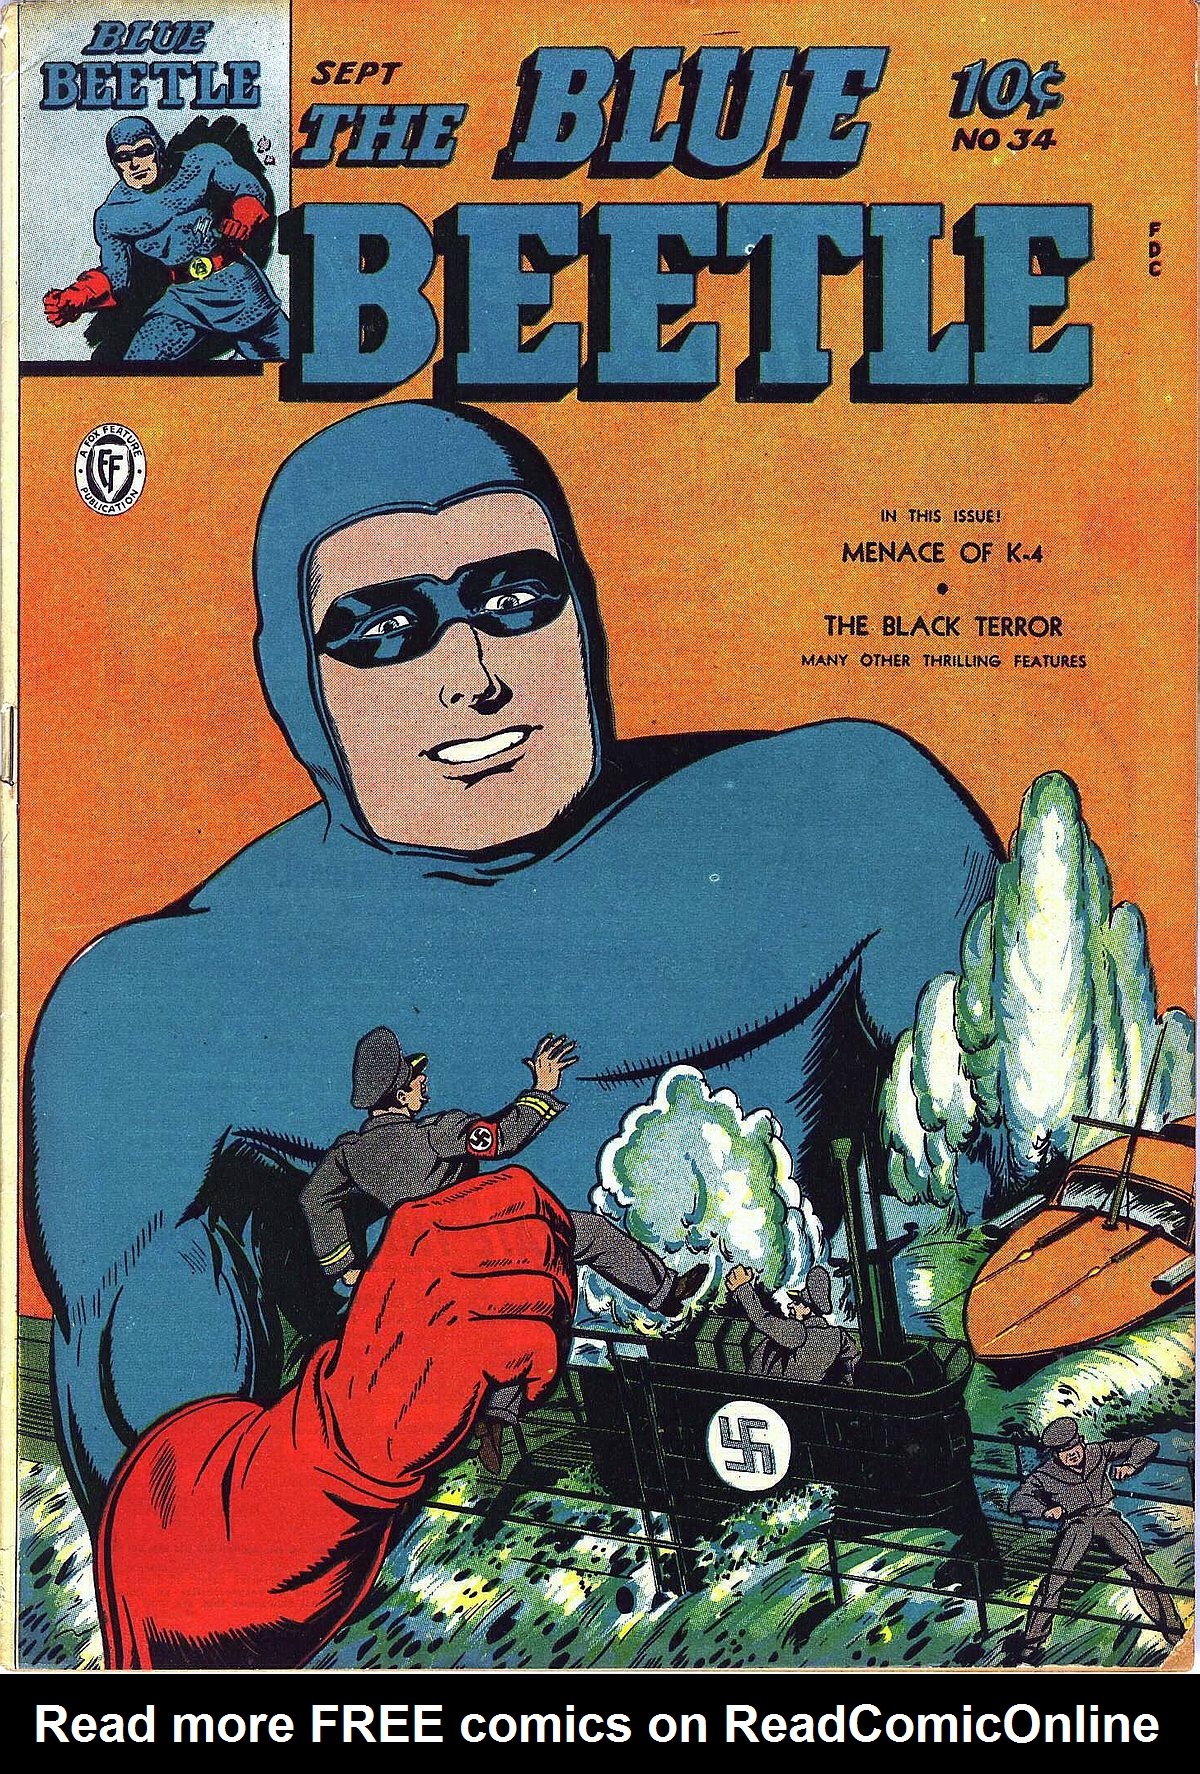 Read online The Blue Beetle comic -  Issue #34 - 1